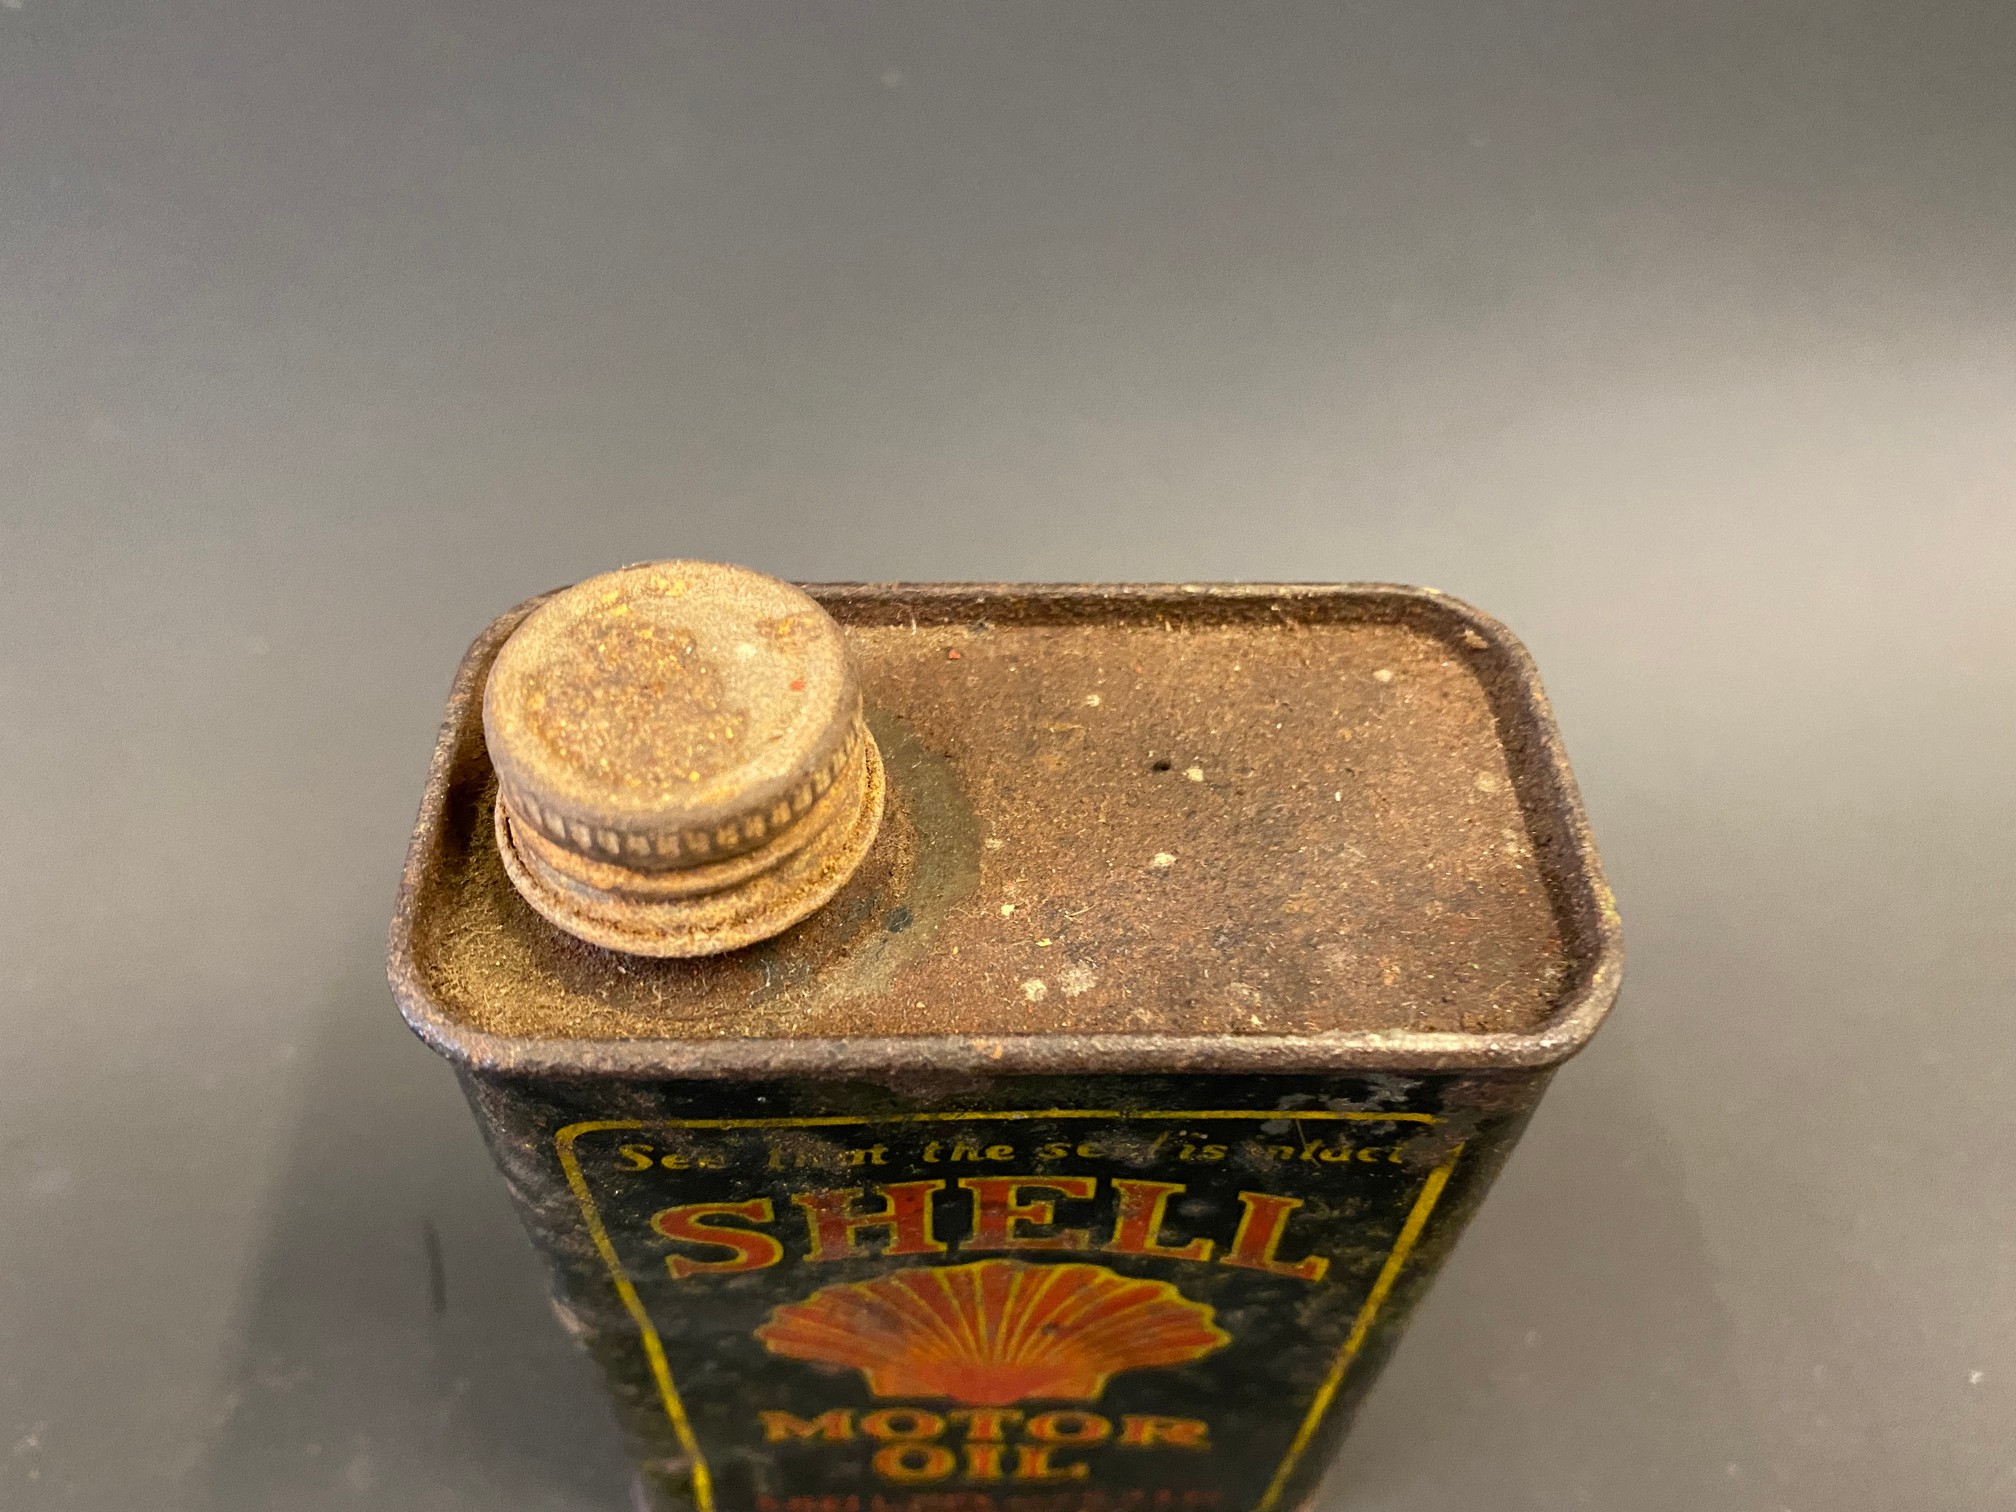 A Shell Motor Oil miniature can. - Image 5 of 6